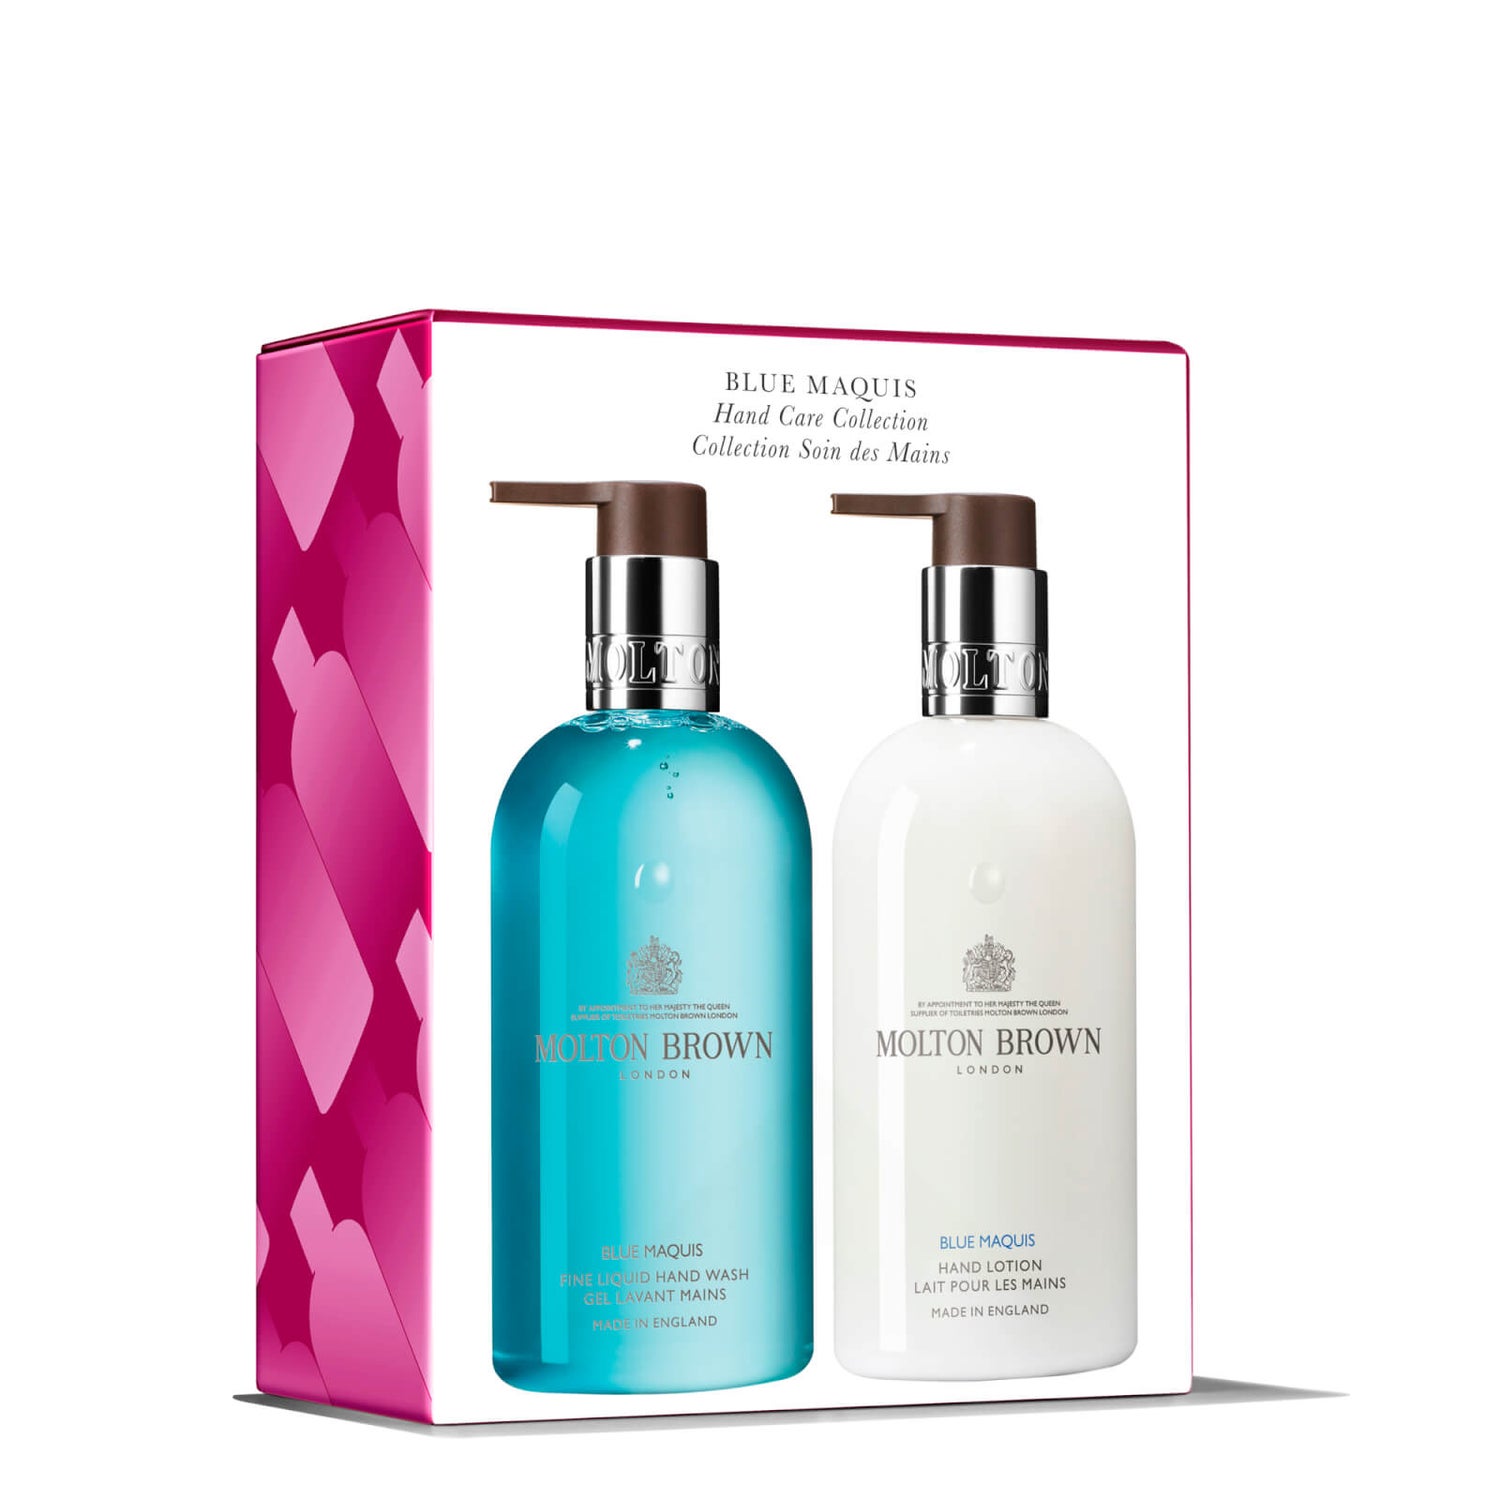 Molton Brown Blue Maquis Hand Care Collection (Worth £47.00)